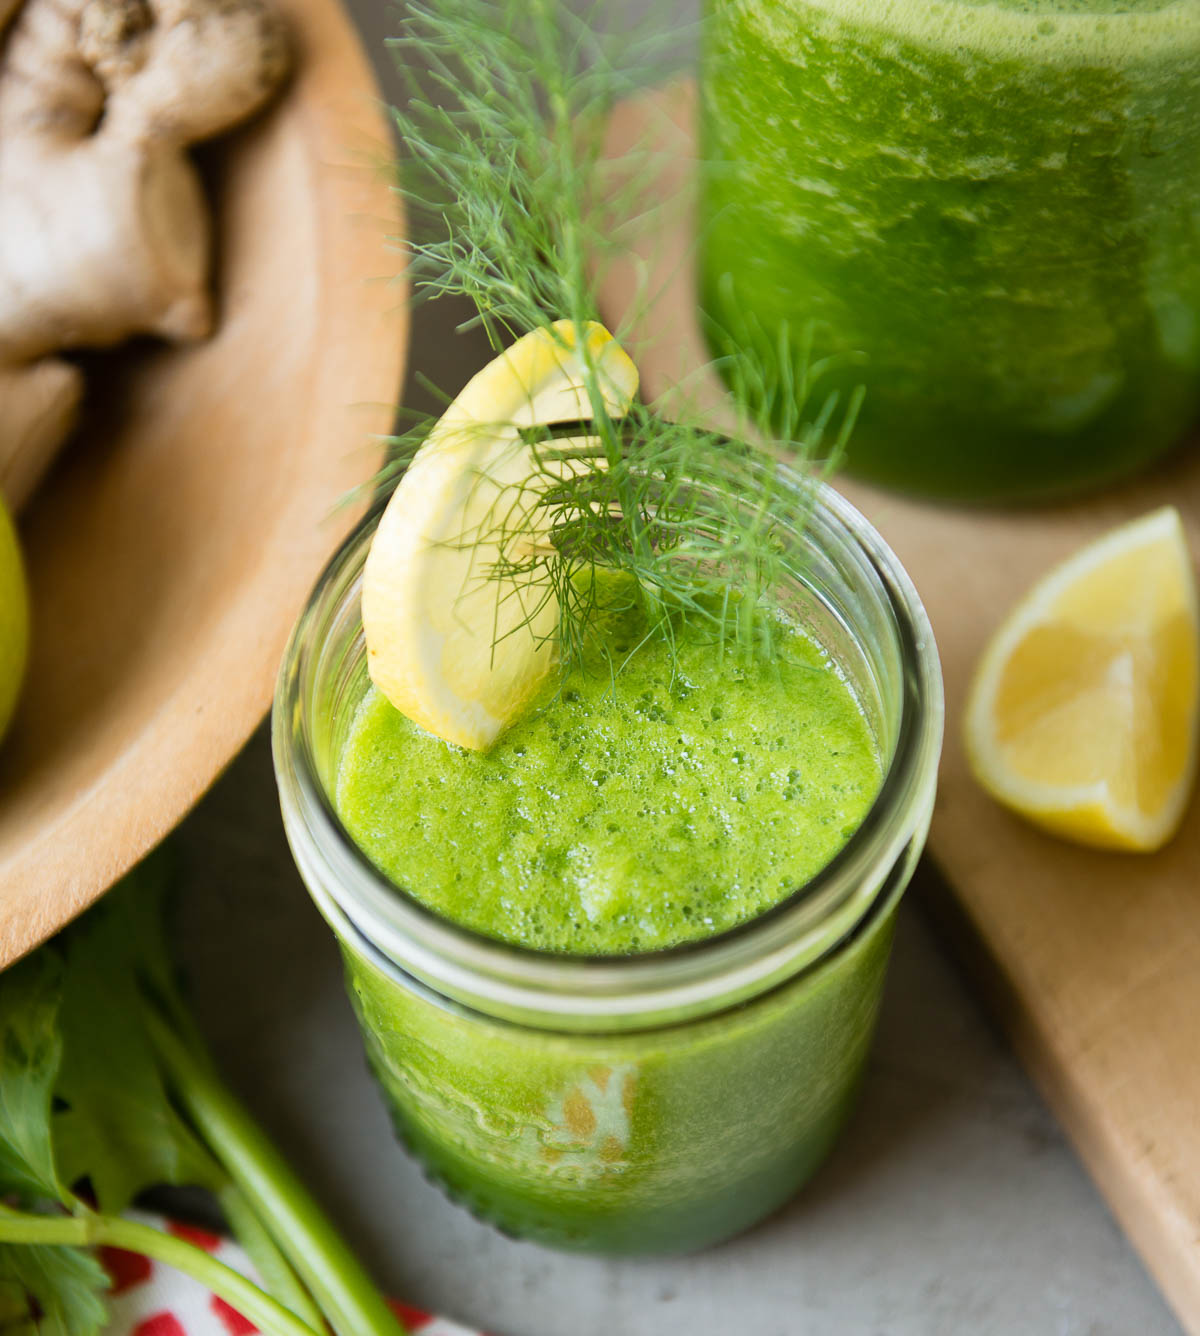 green smoothie in a glass jar topped with a lemon slice and fennel fronds.